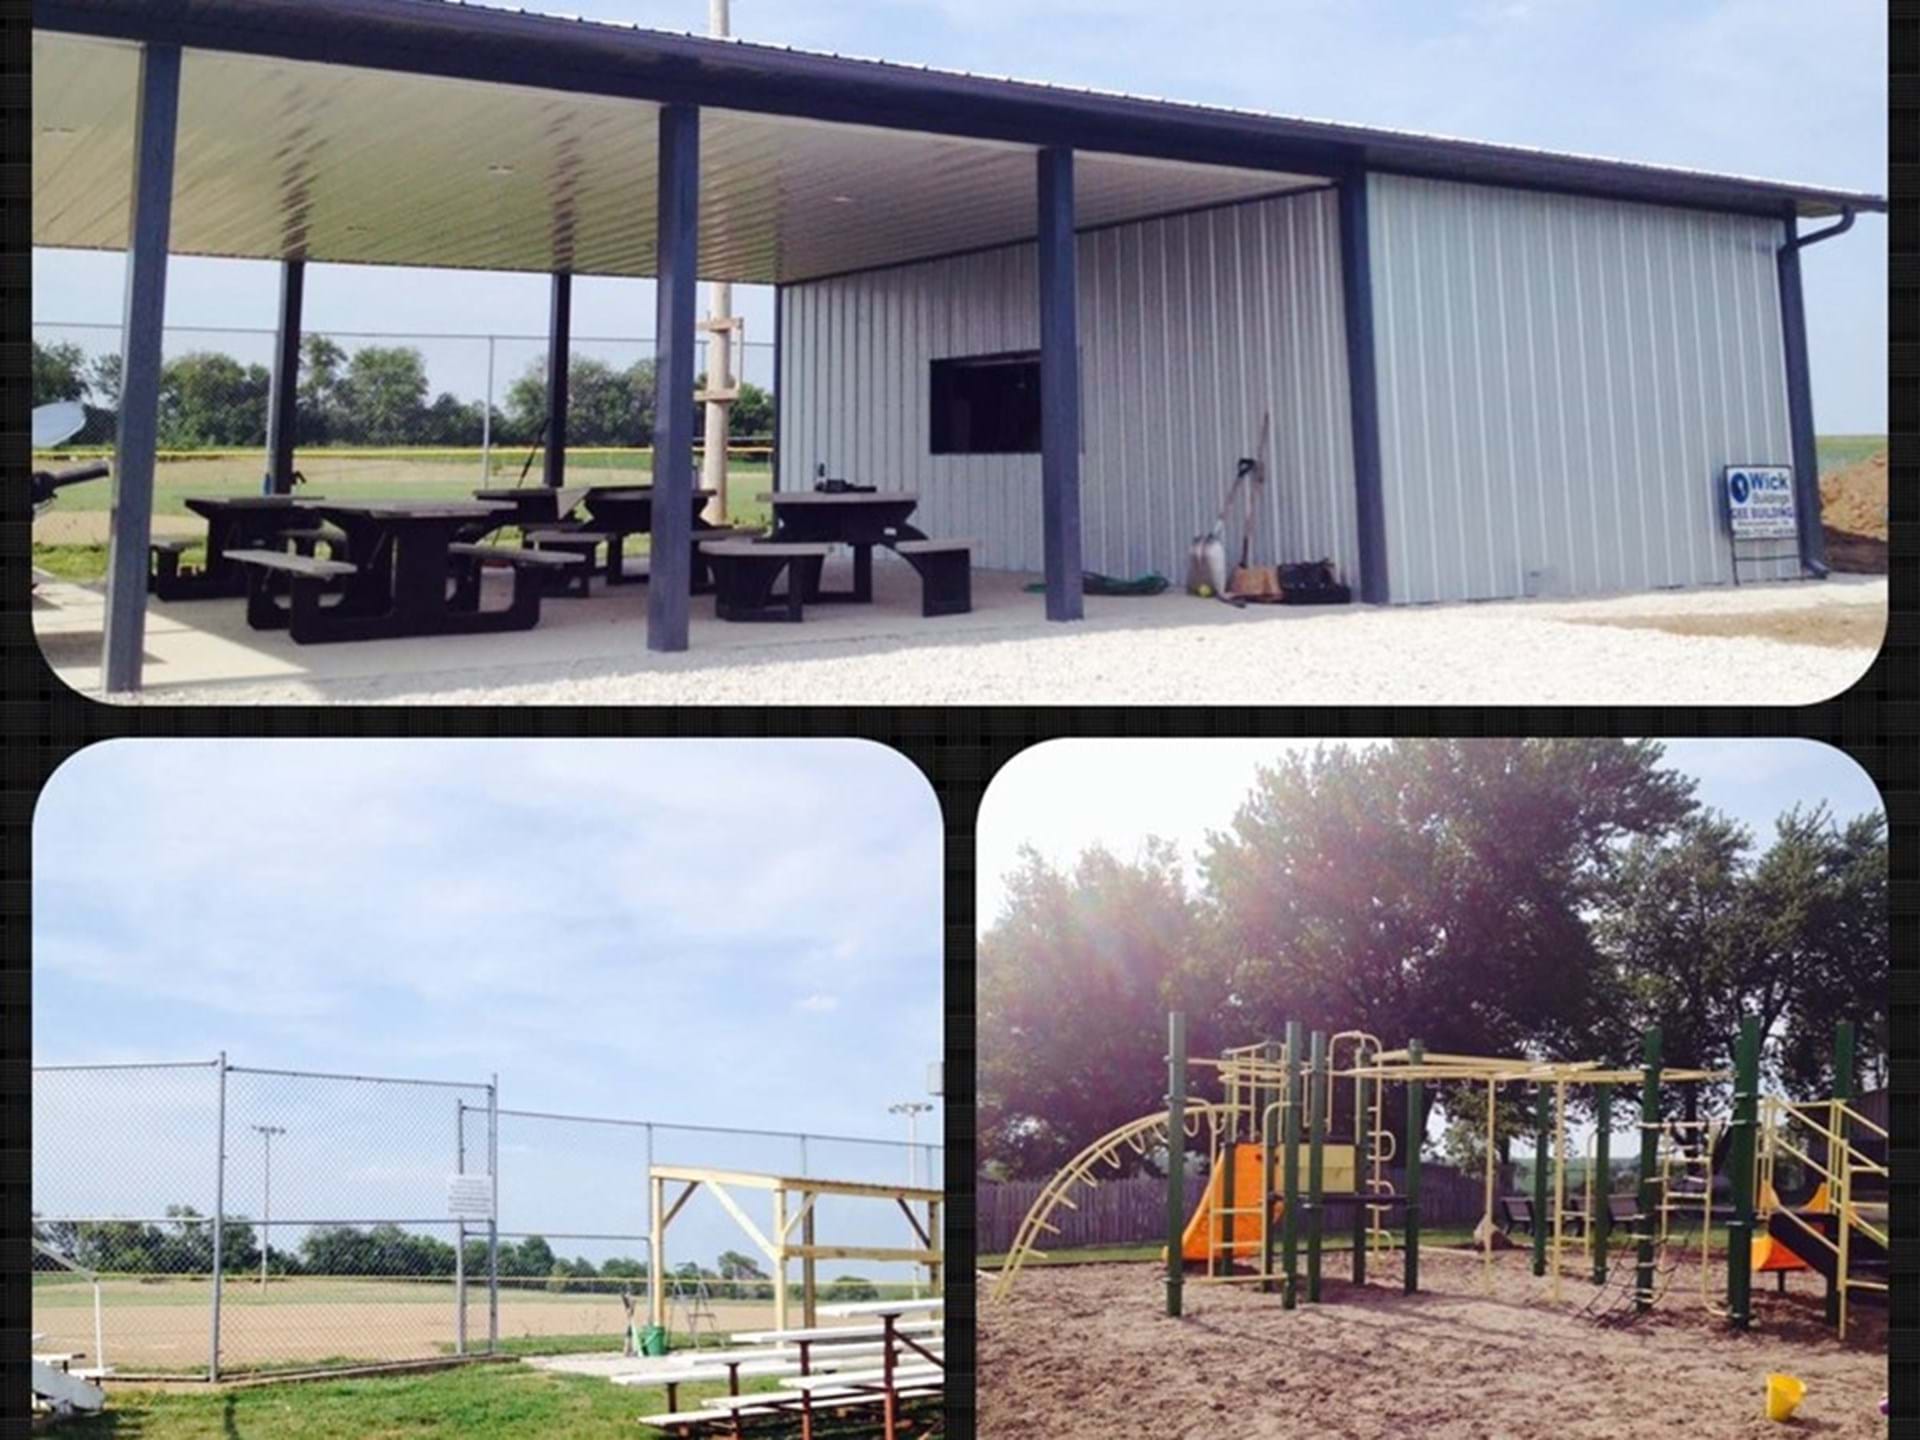 Concessions, covered eating area, playground, and softball field for a family friendly time in Imogene, IA.